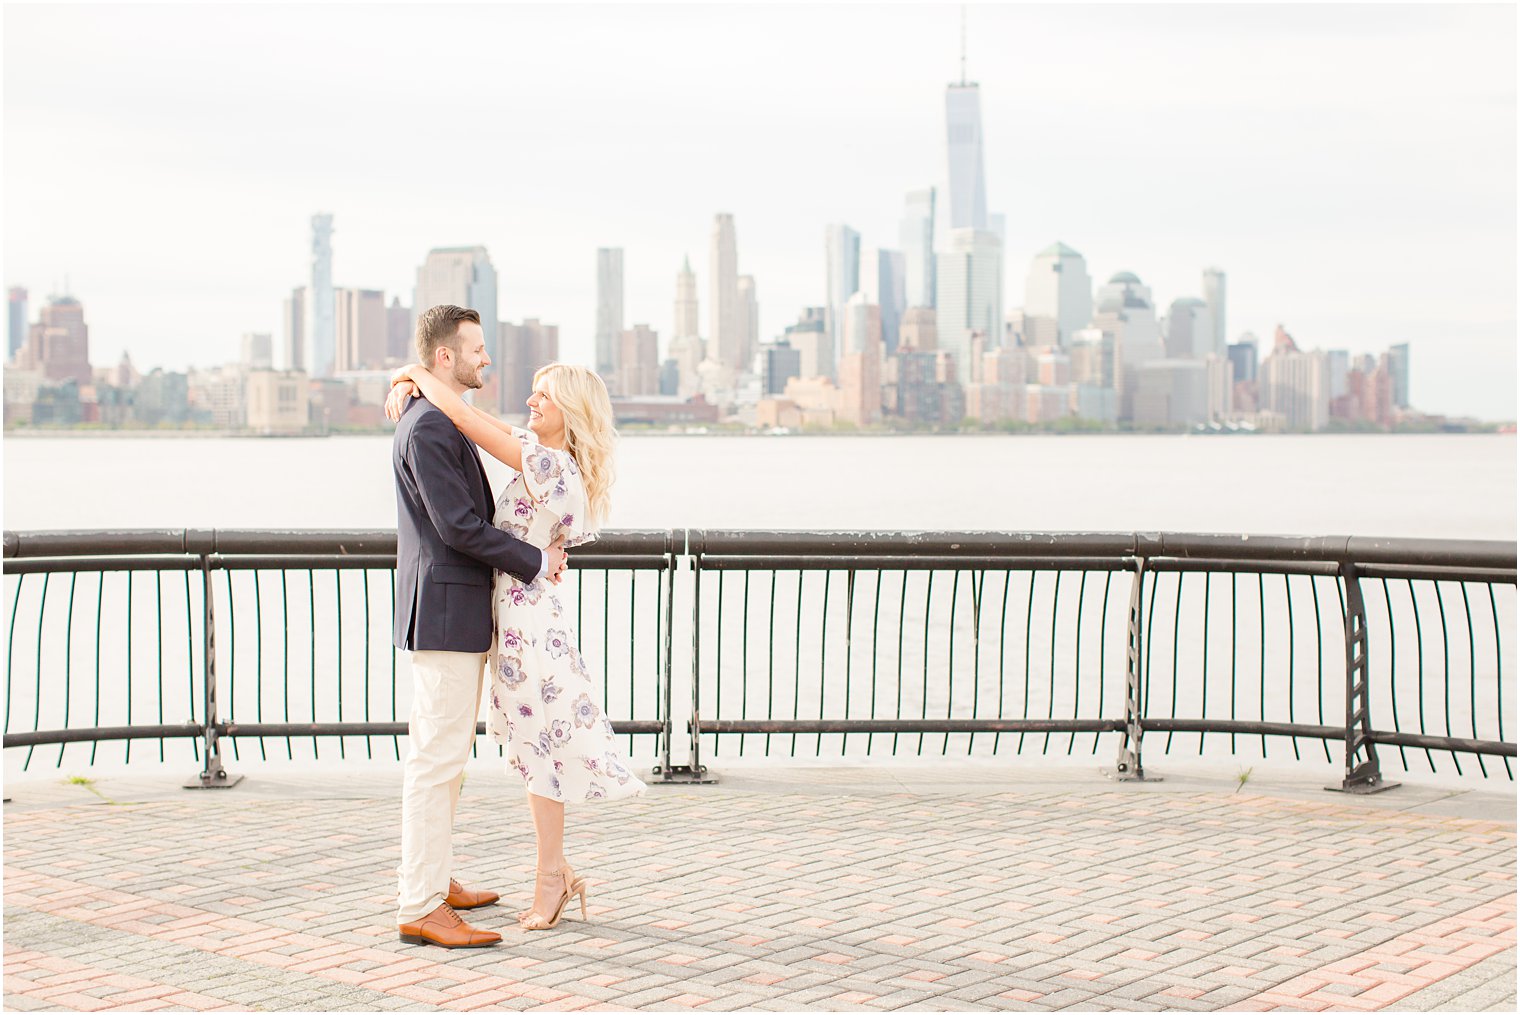 How to Choose a Location for Your Engagement Photos